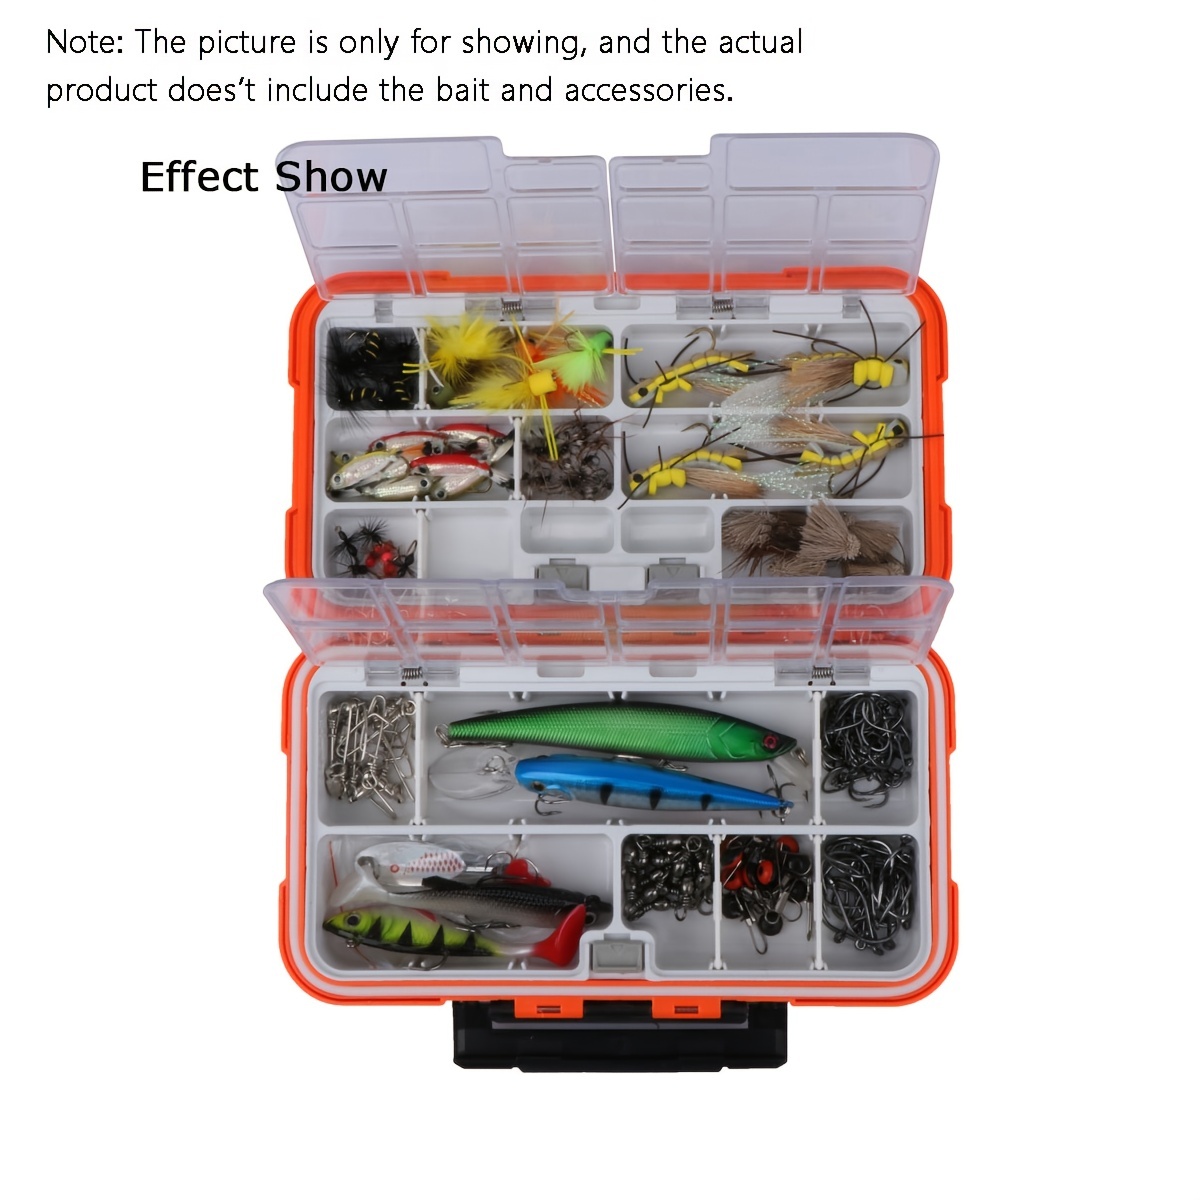 Best Storage Case For Large Fishing Glide Baits – Meiho Tackle Box